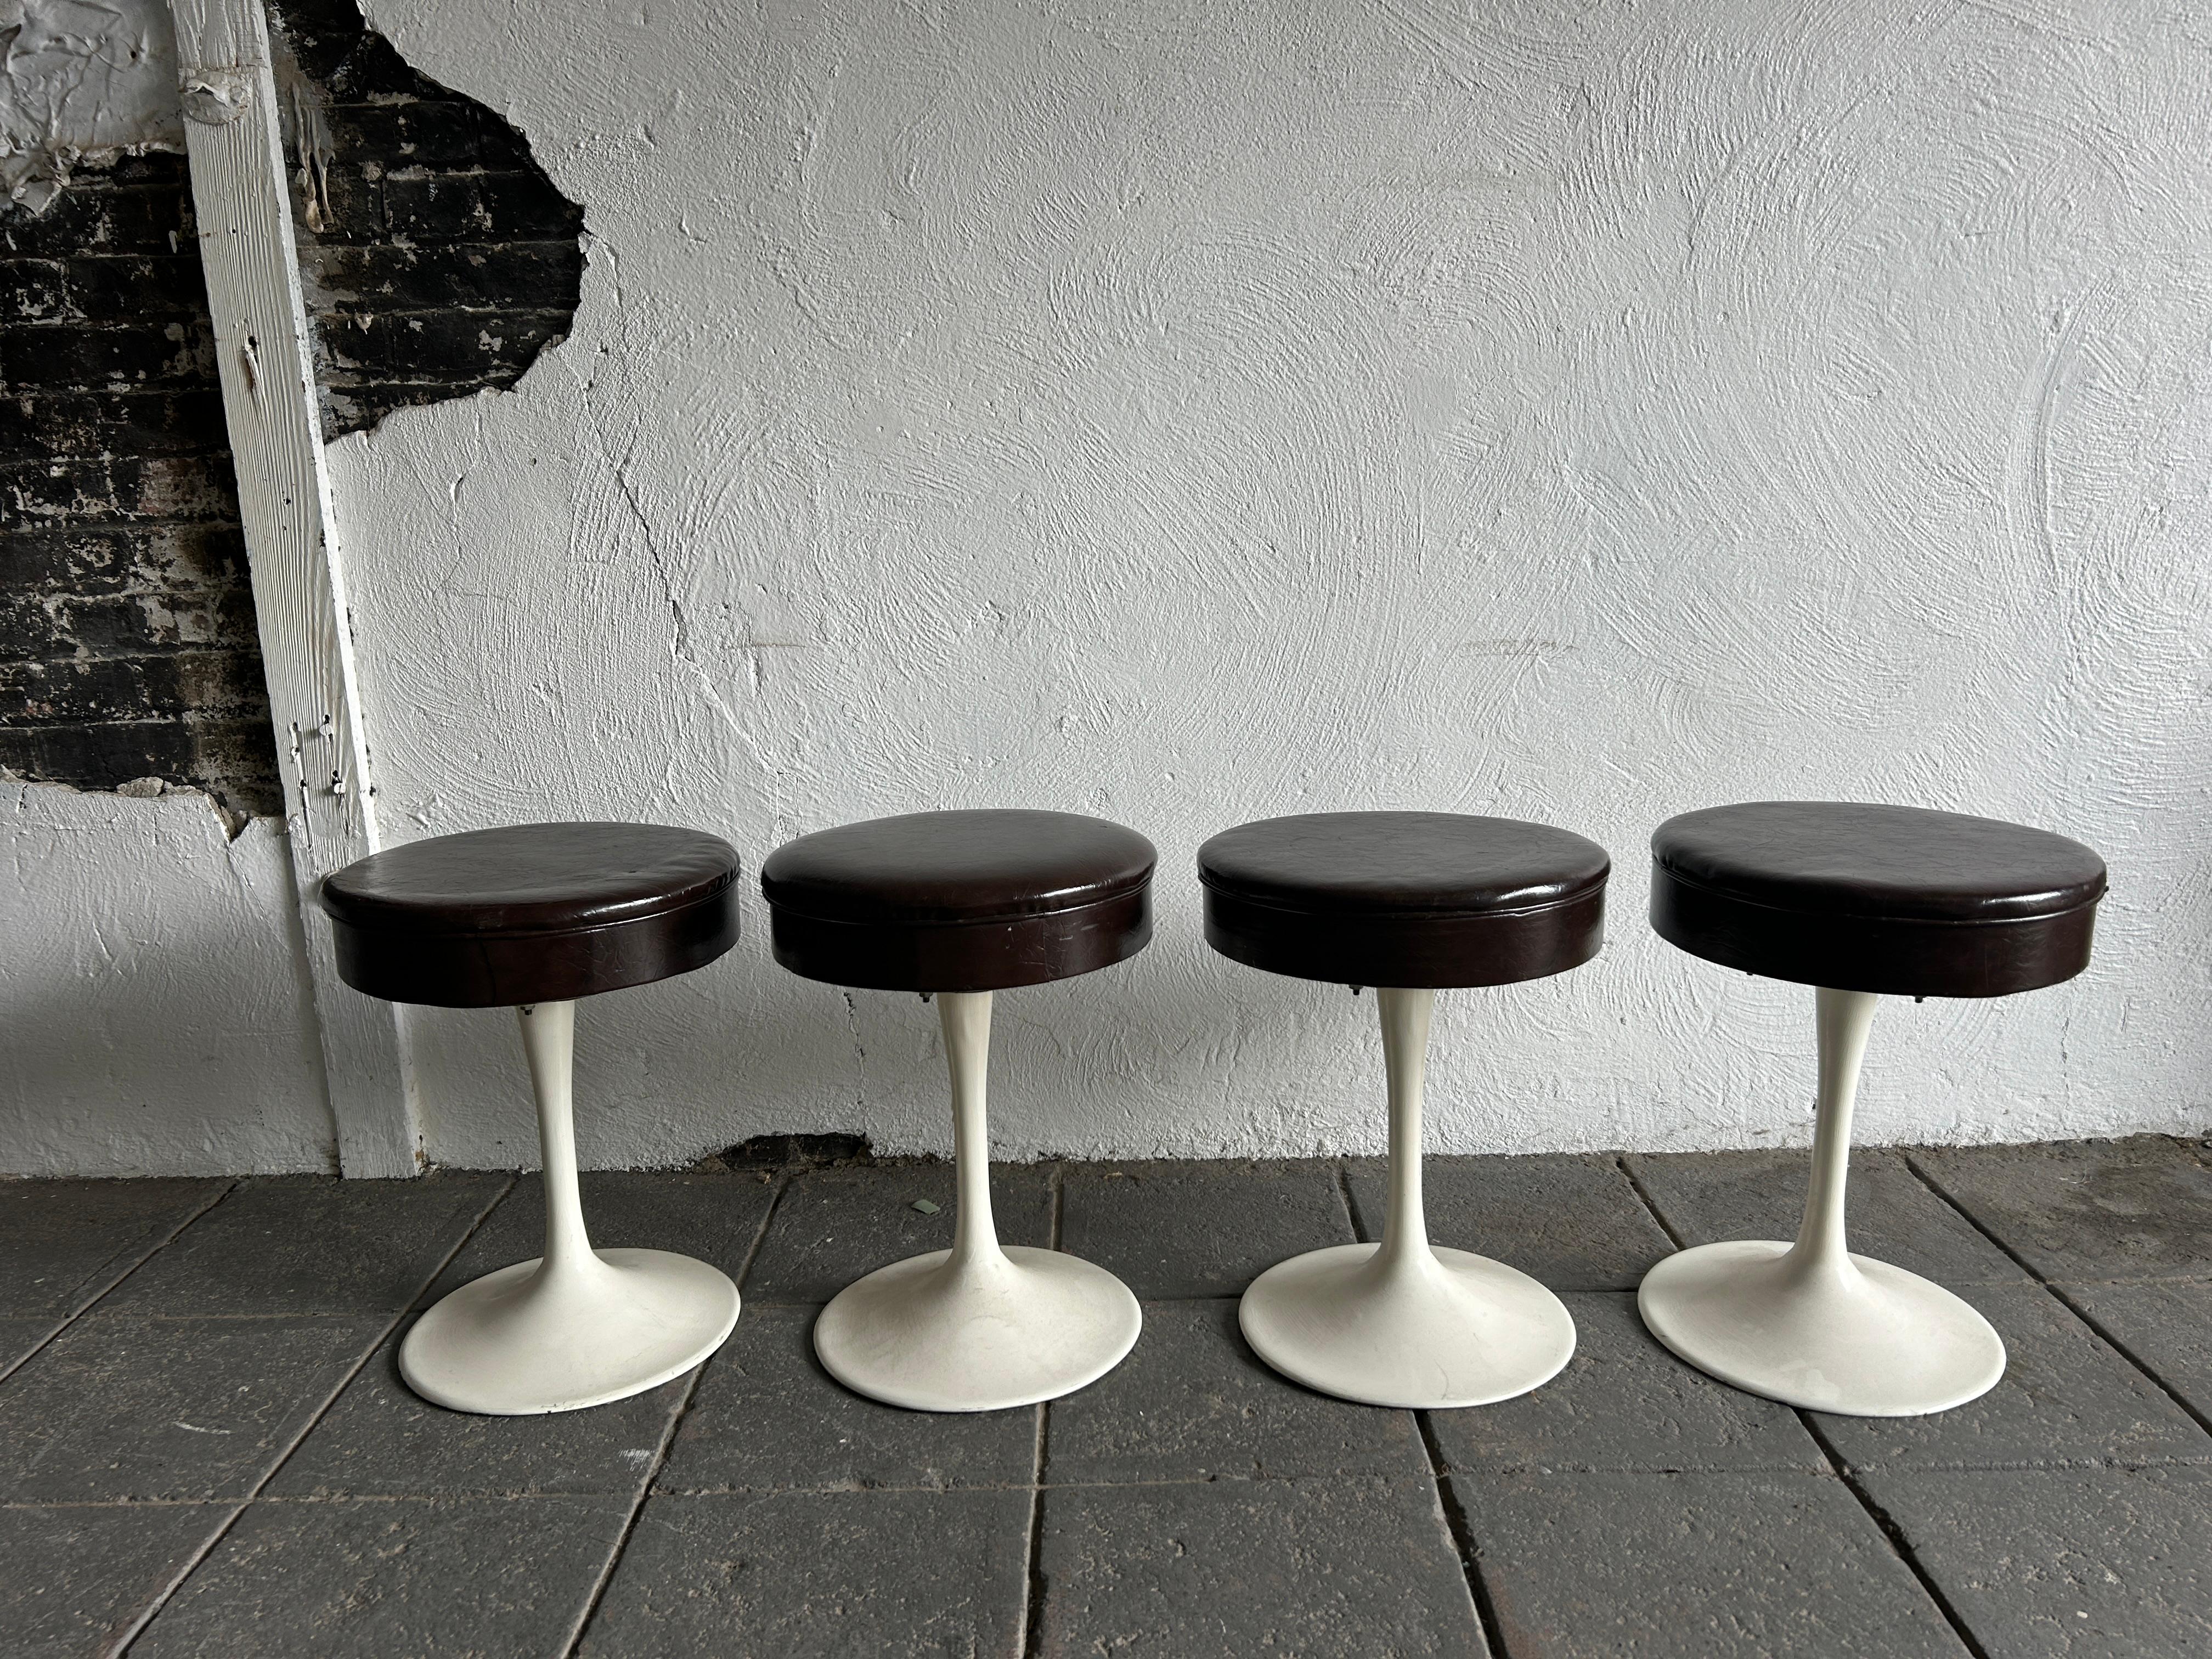 Set of 4 mid century tulip swivel stools style of Knoll. Great vintage set with metal tapered bases and rotating brown vinyl upholstery. Great solid set. Located in Brooklyn nyc. 

Sold as a set of 4 

Each stool measures 18” high x 14” diameter 